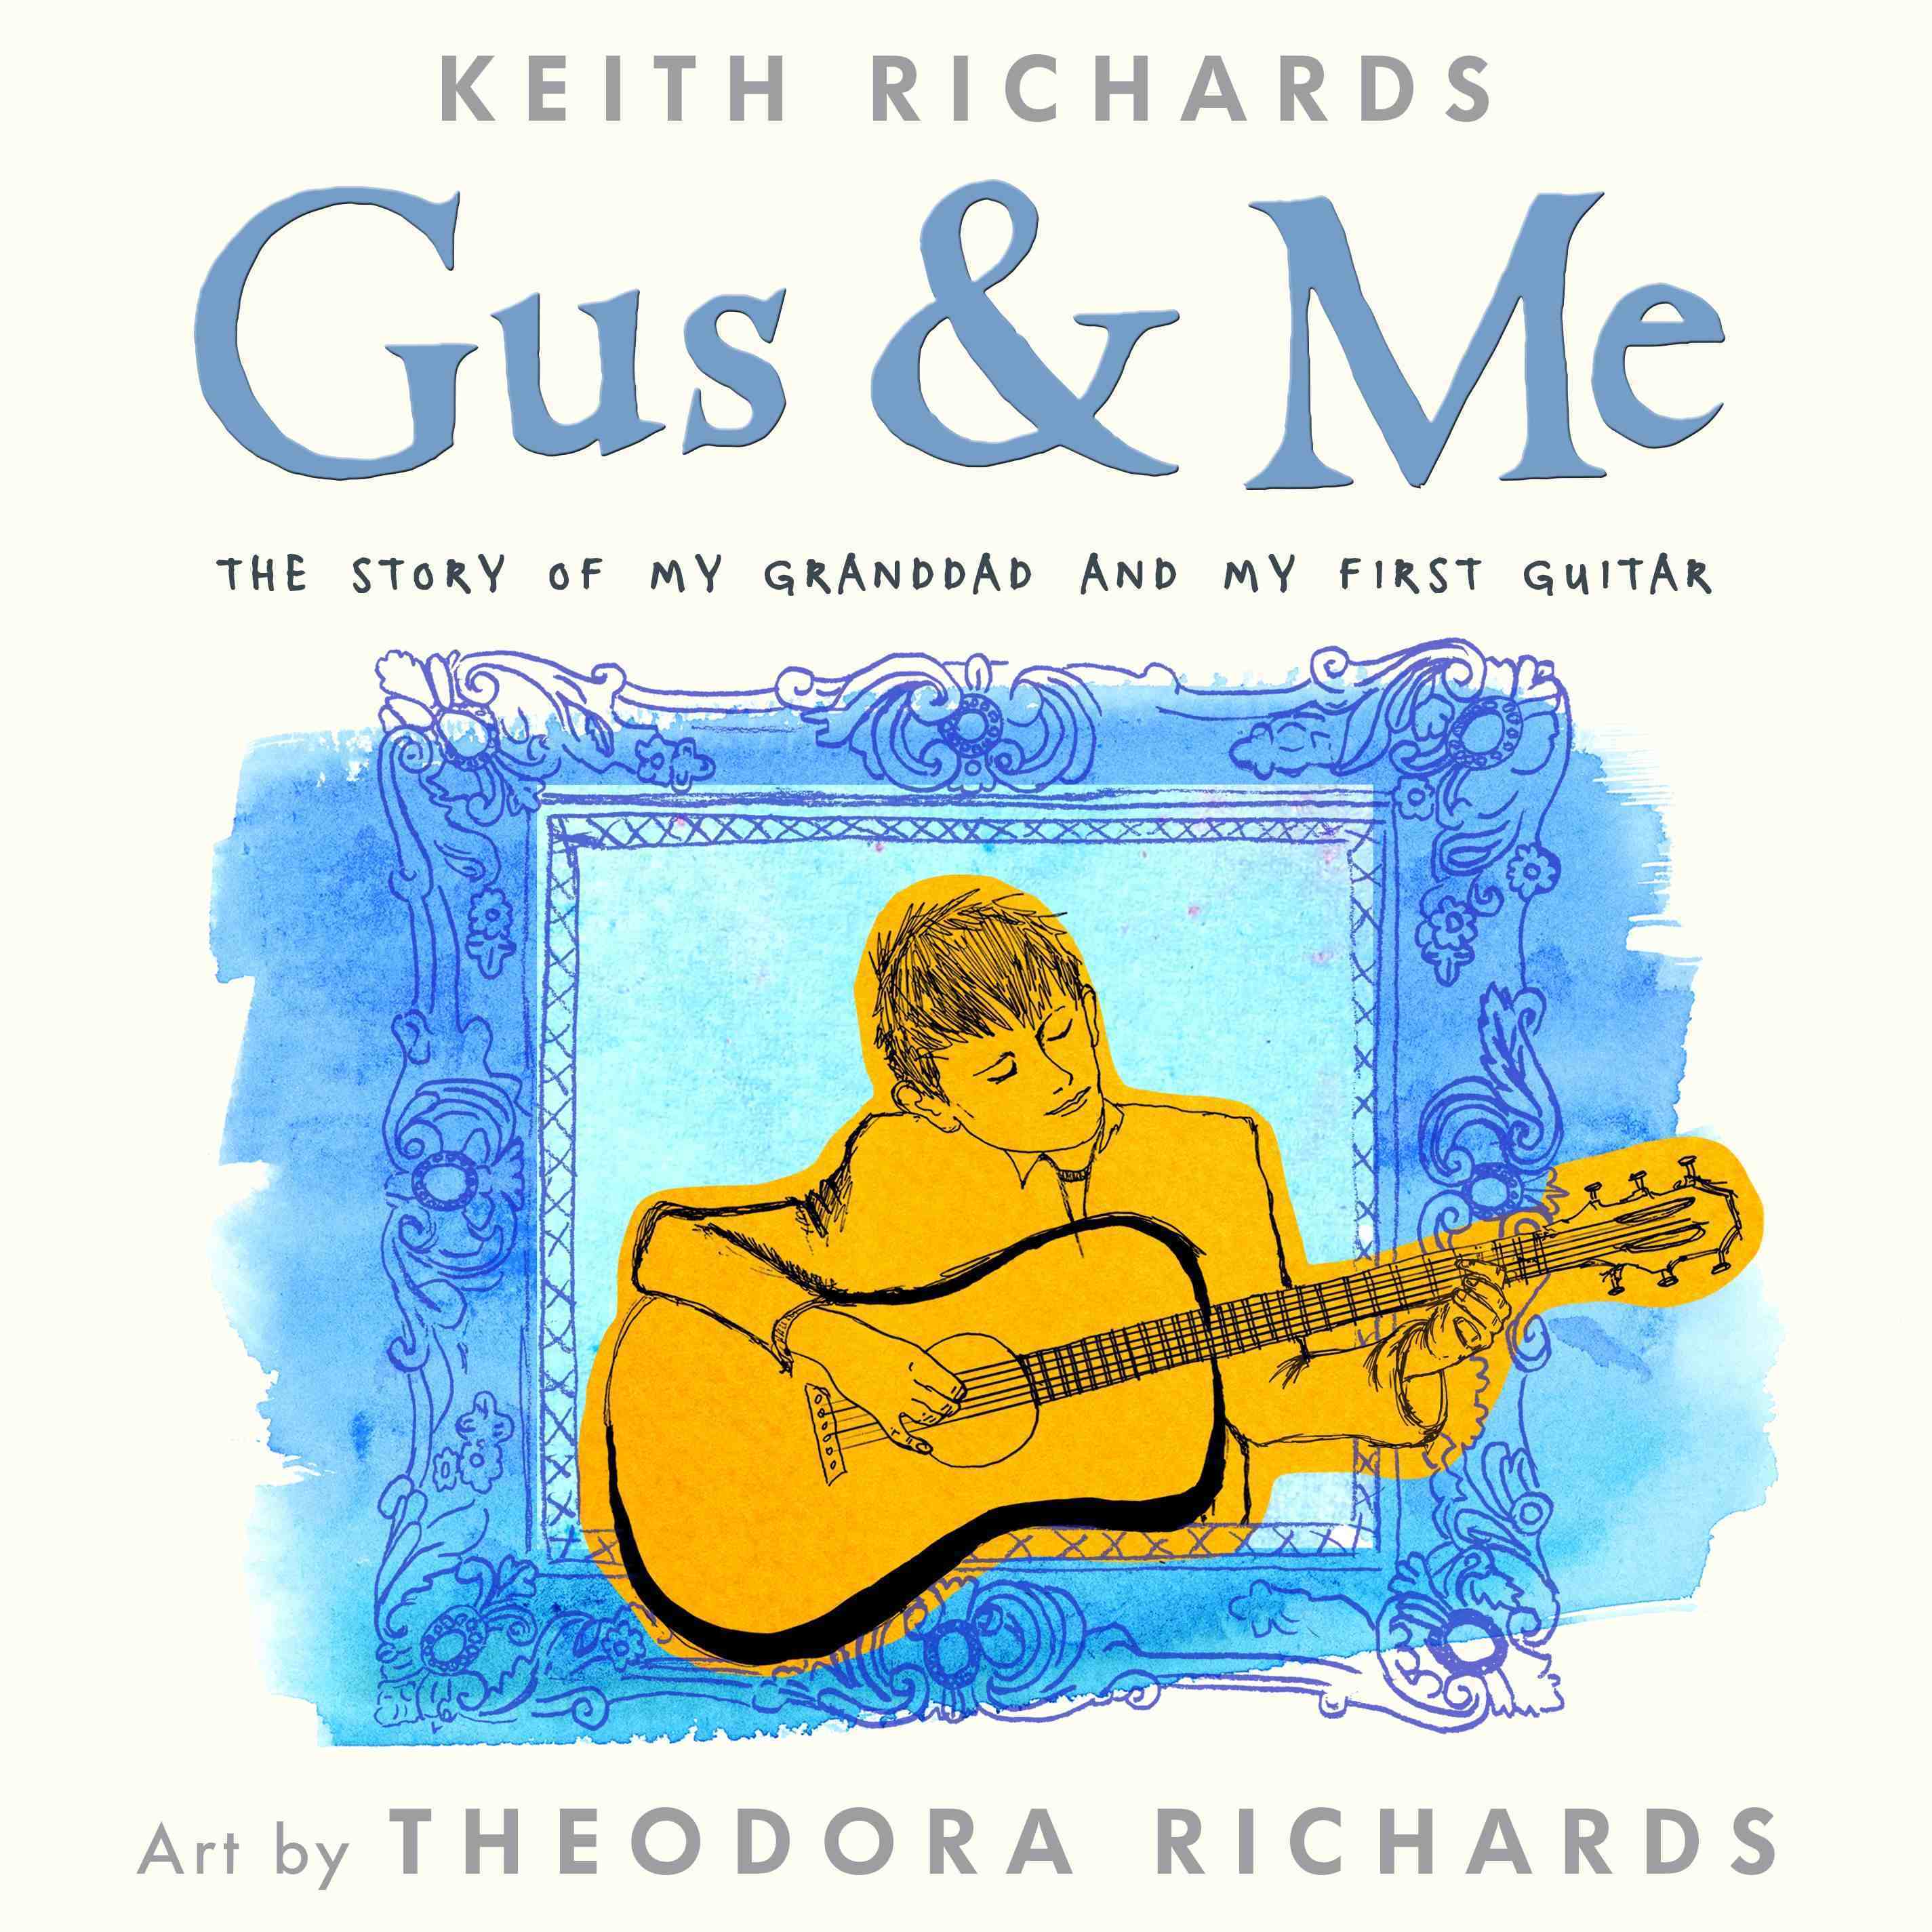 Cover art for the forthcoming picture book, Gus &amp; Me: The Story of My Granddad &amp; My First Guitar by Keith Richards, with illustrations by Theodora Richards (Business Wire—Little, Brown Books for Young Readers)